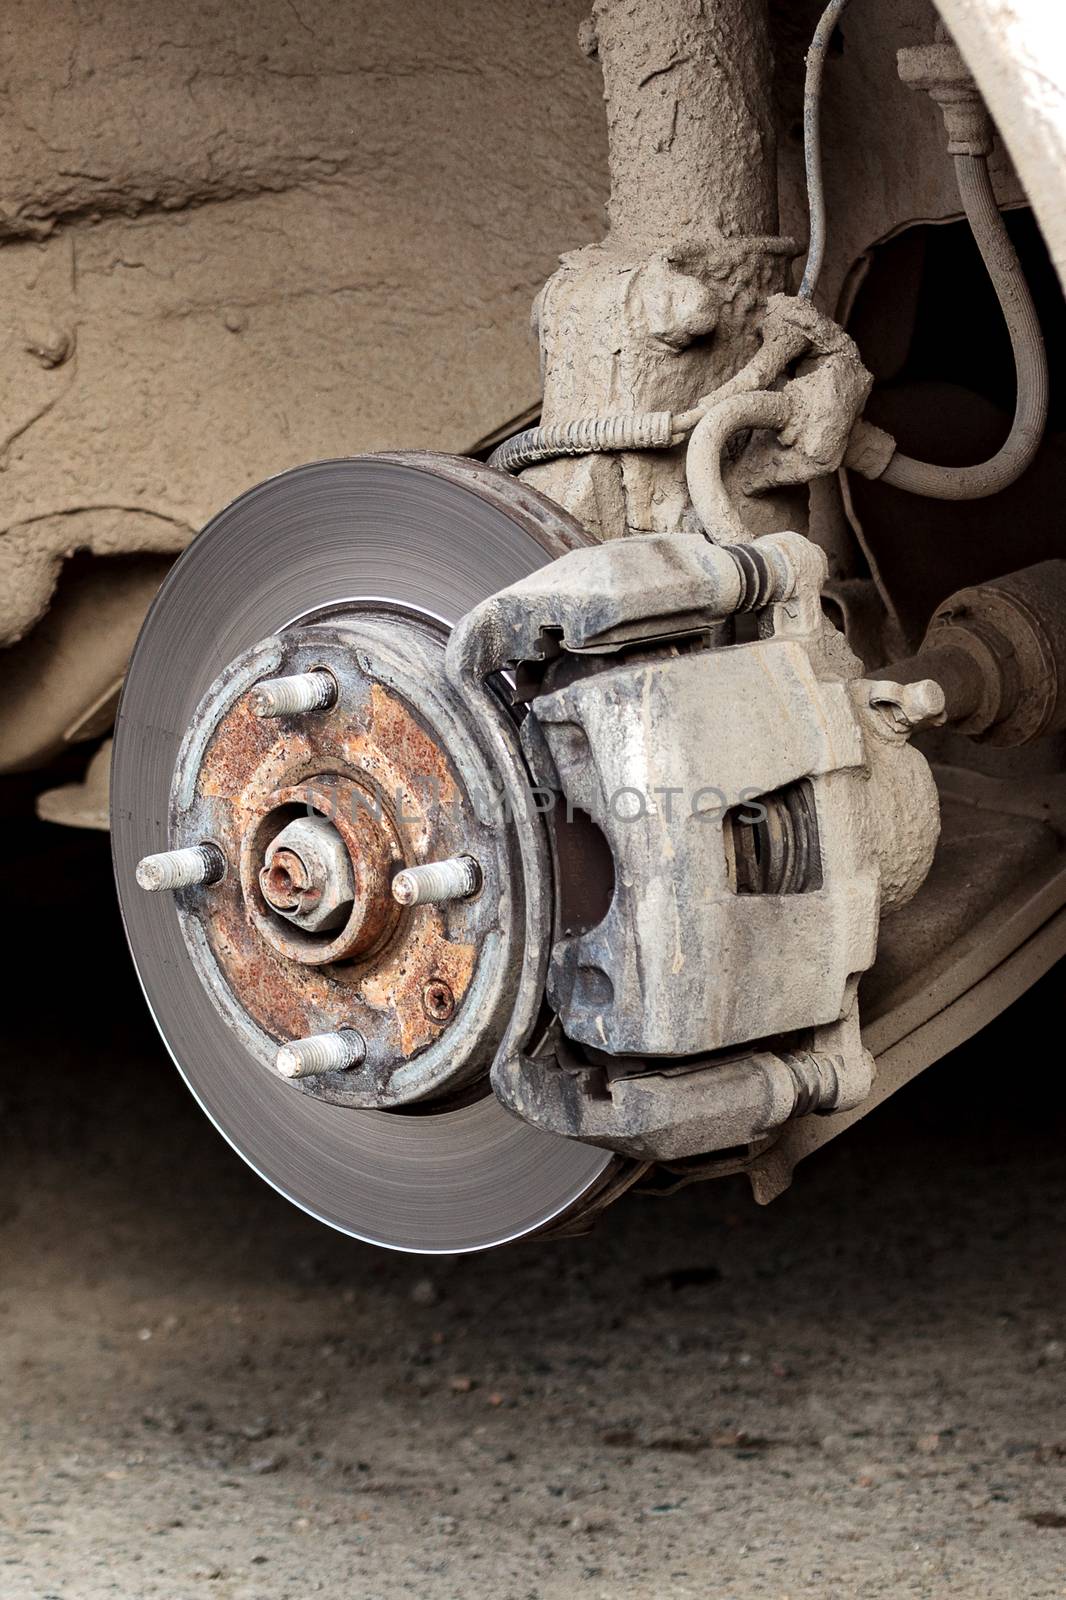 Closeup shot of car's disc brake without wheel on it by Nobilior